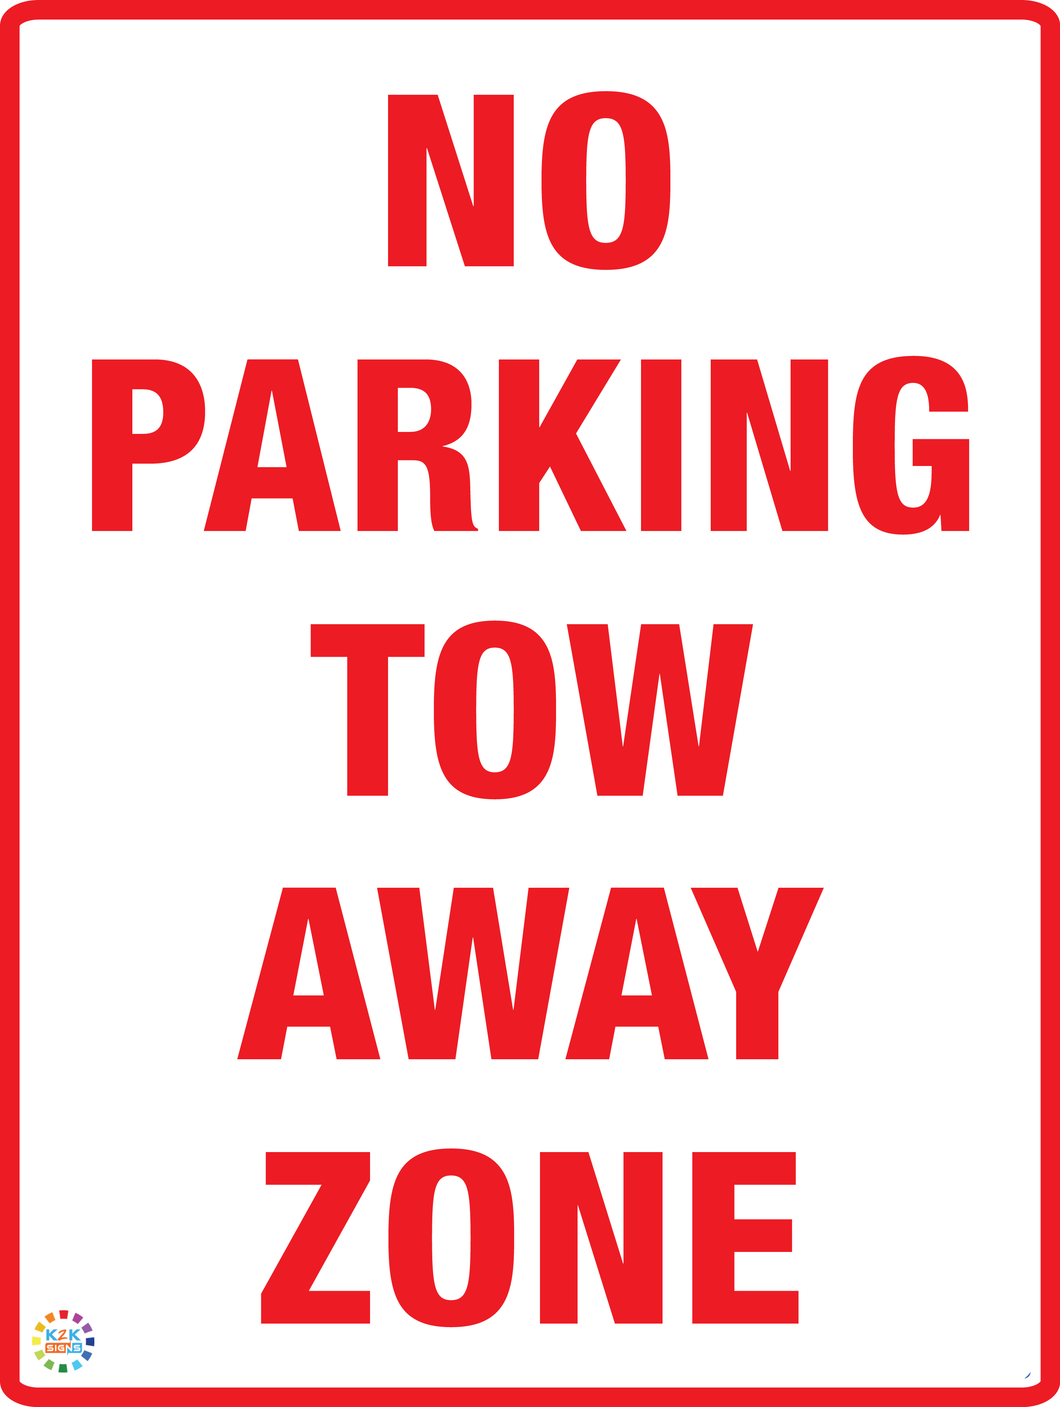 No Parking - Tow Away Zone